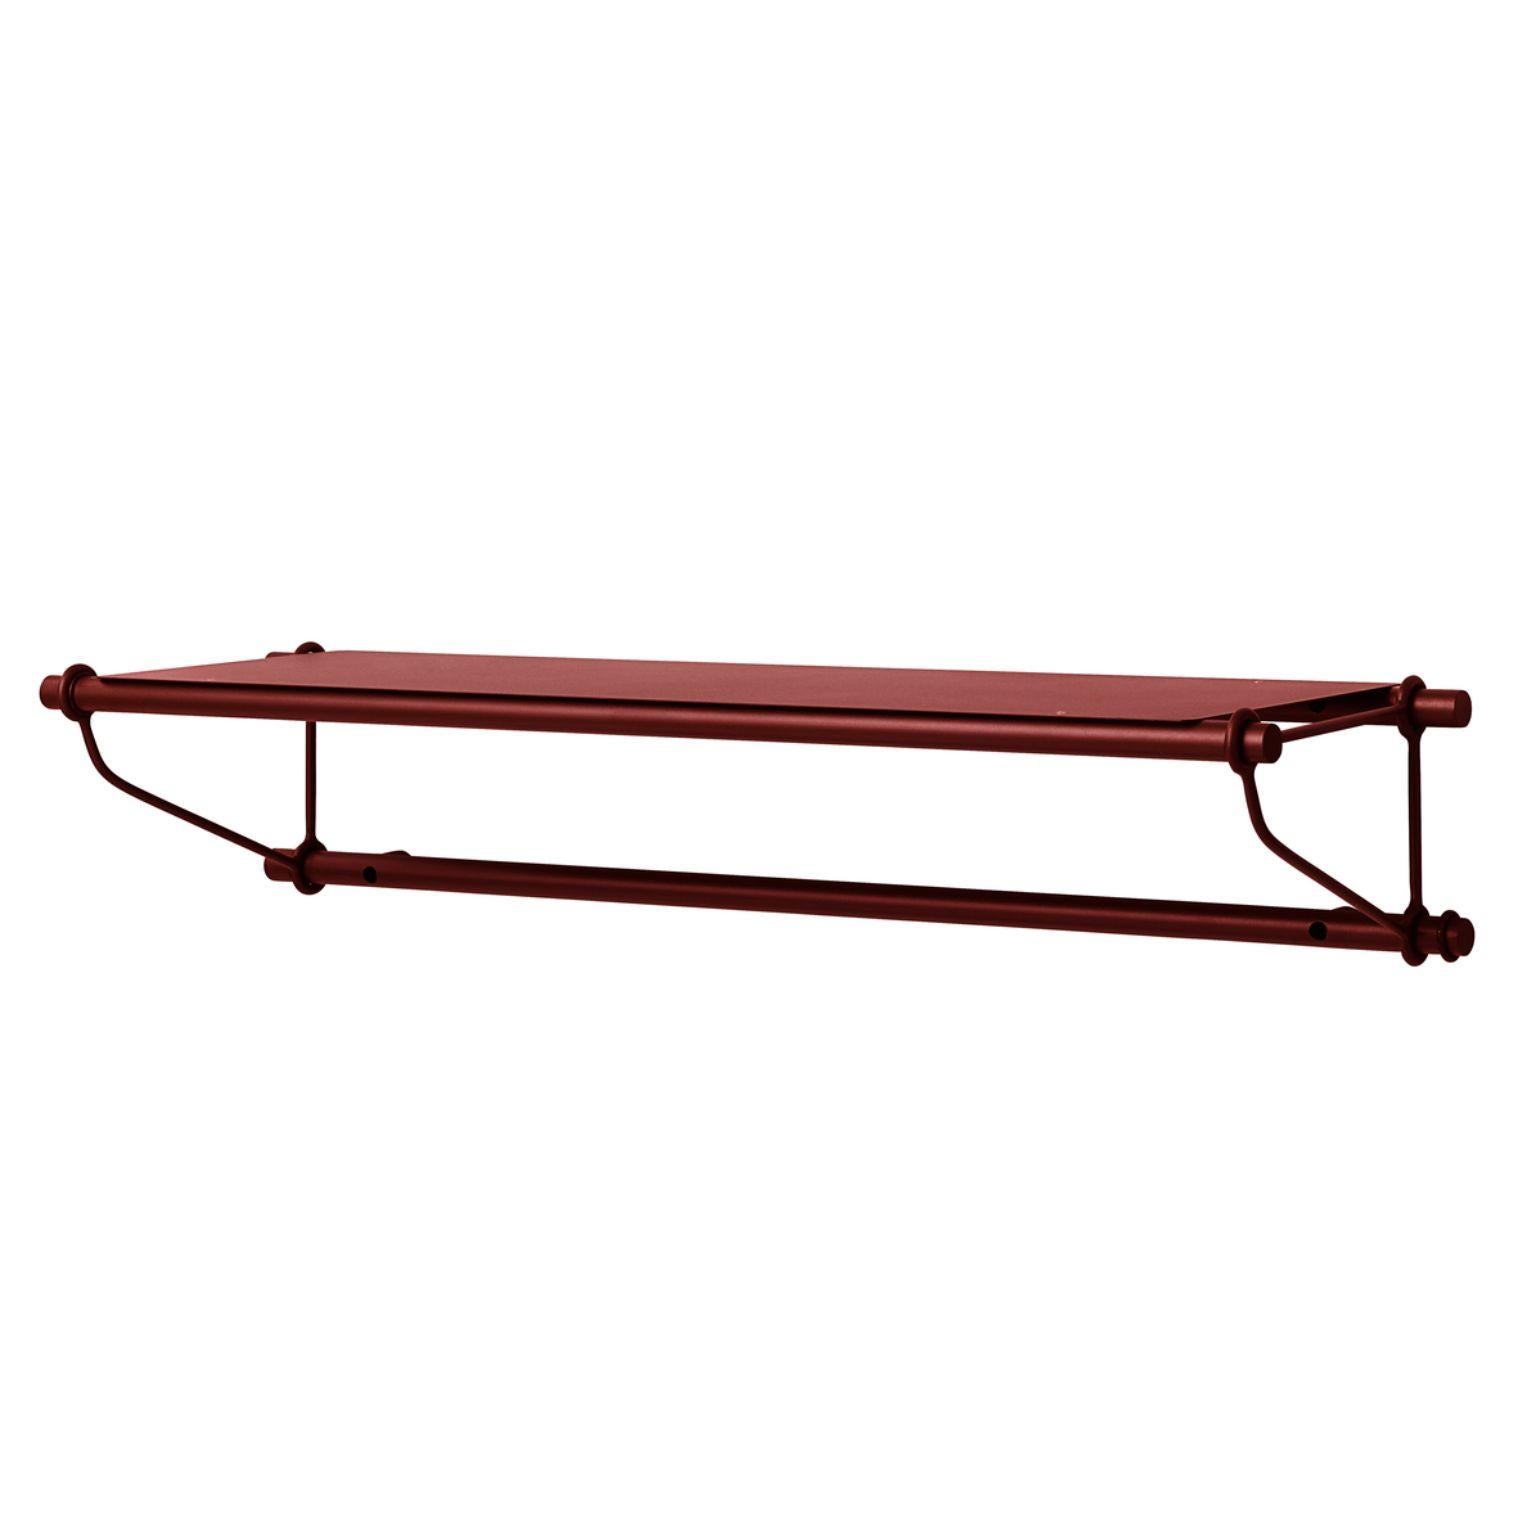 Post-Modern Parade 1 Shelf Top Oxide Red by Warm Nordic